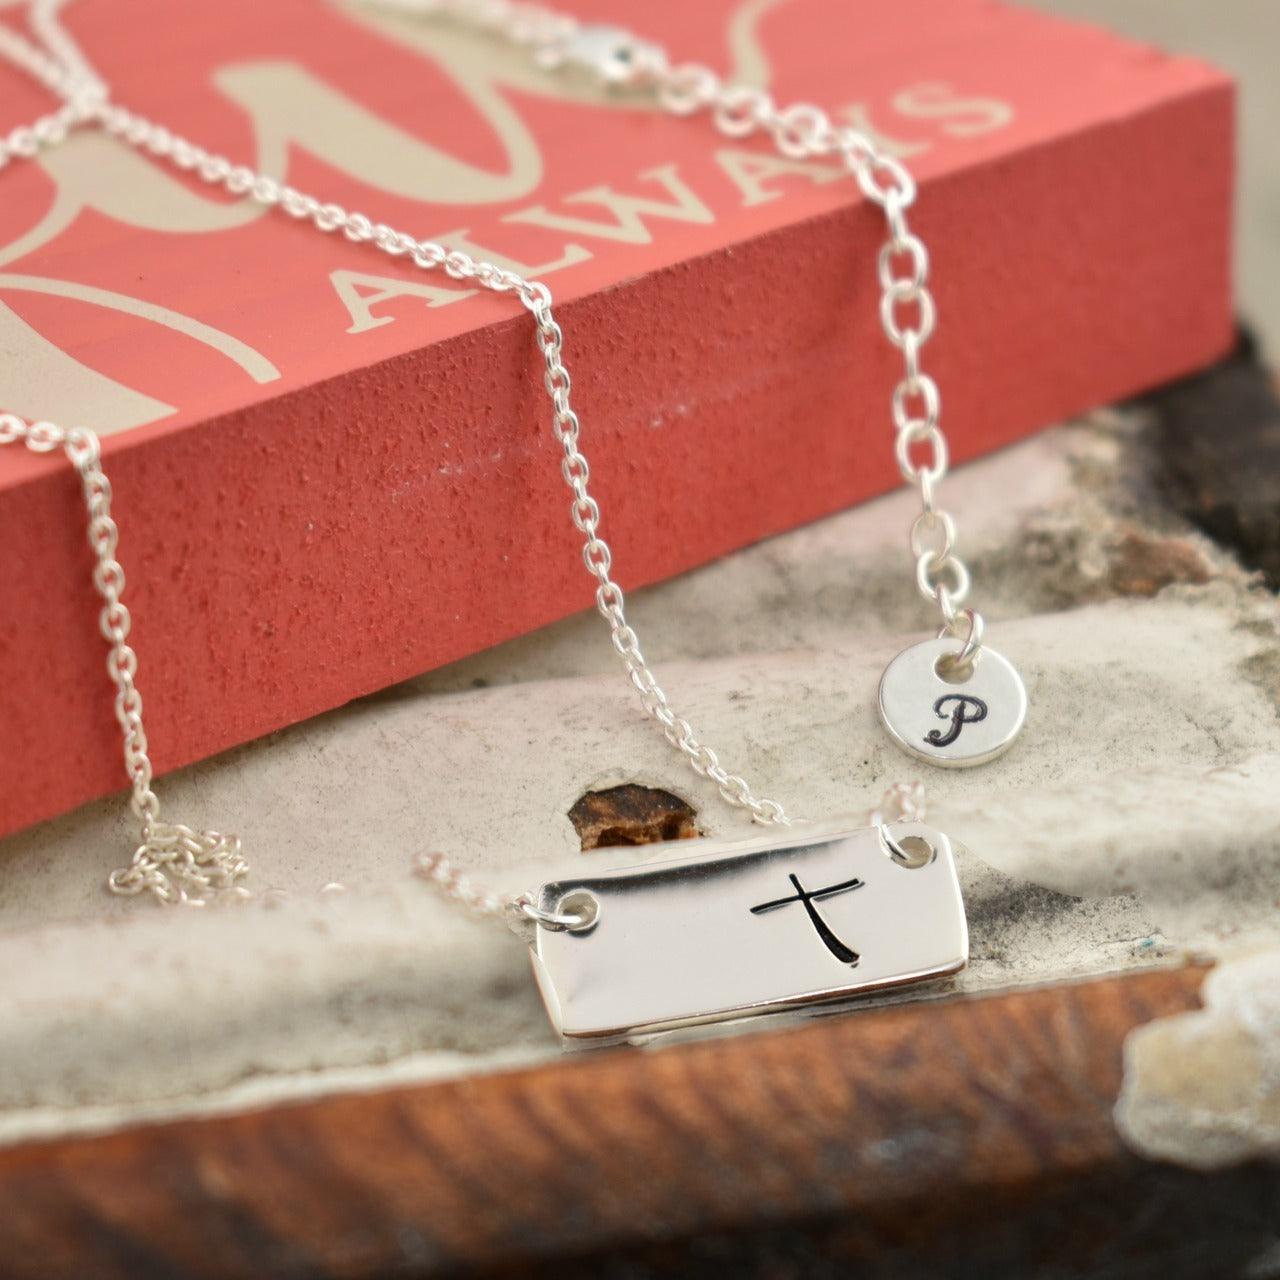 Add a hand-stamped disk to your necklace for just $6.00 to personalize.